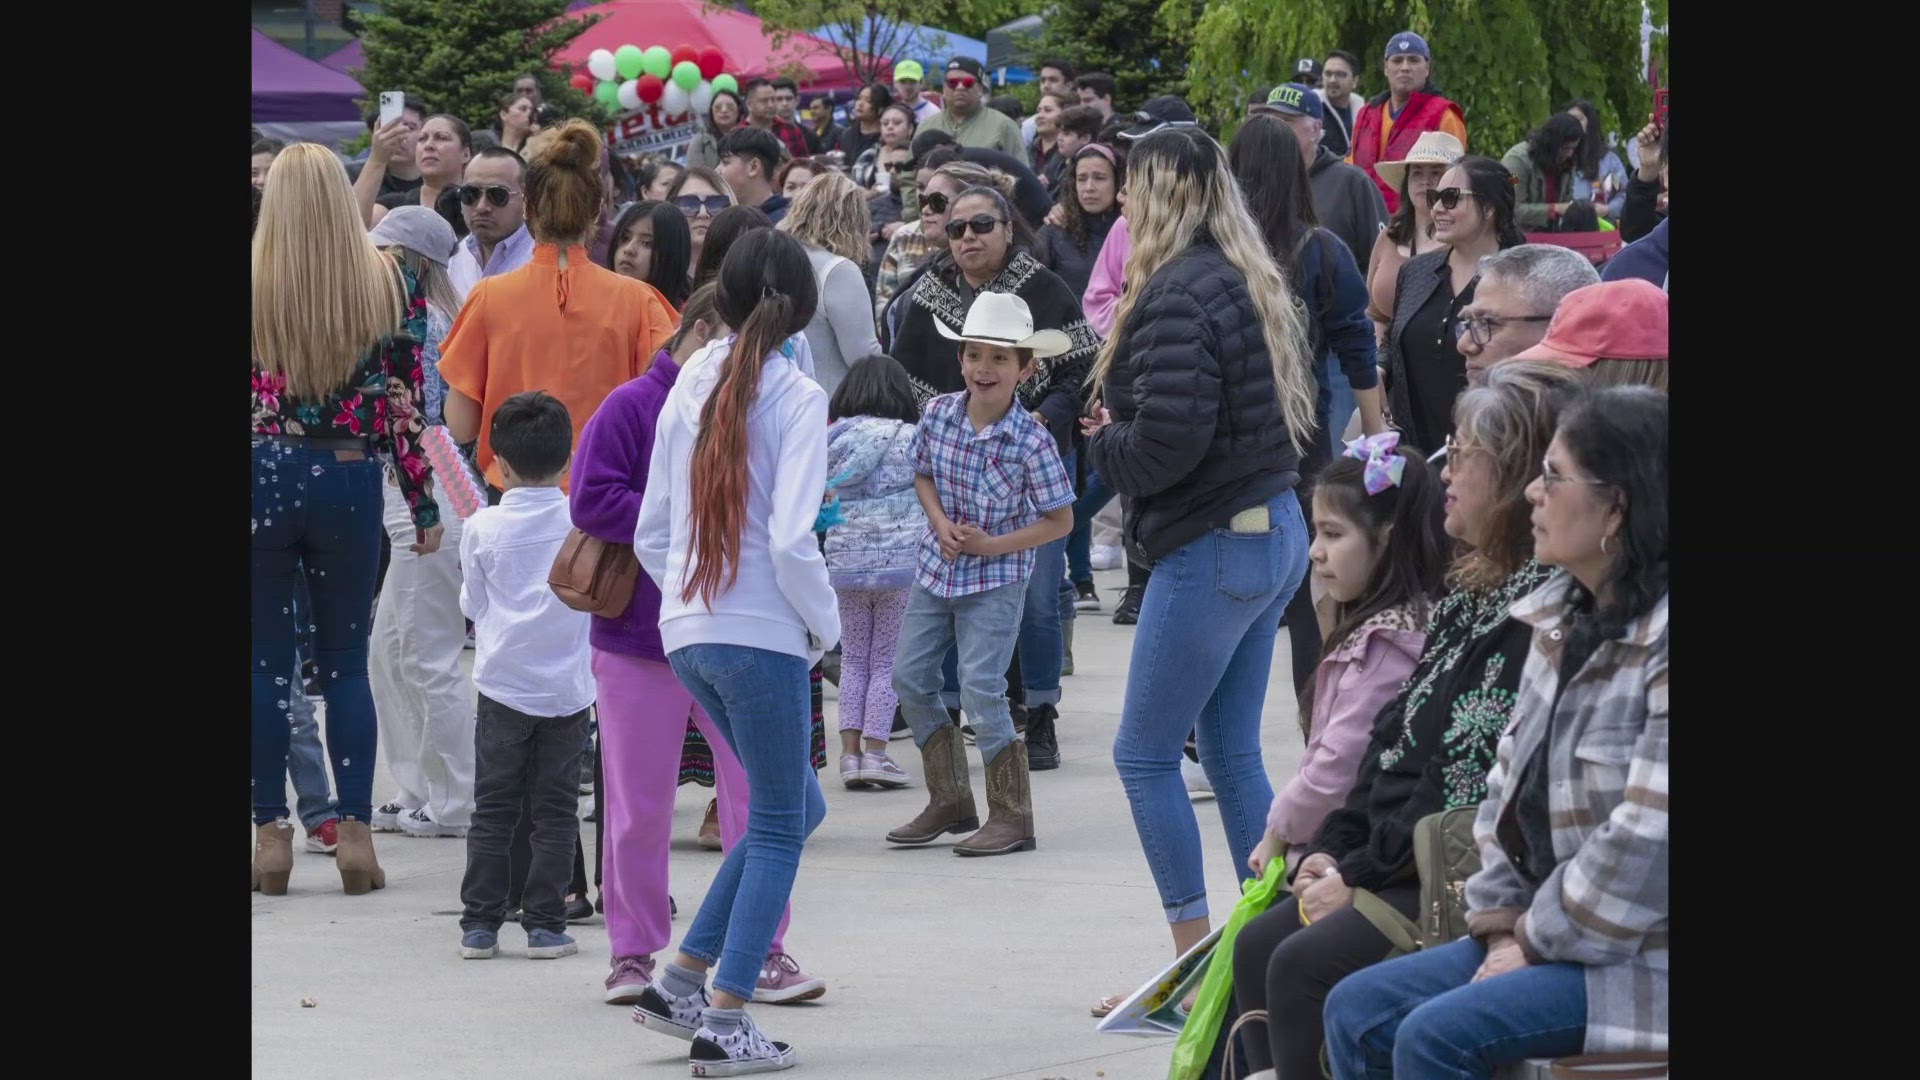 Centro Cultural Mexicano invites all community members to its Cinco de Mayo event on May 5 in Redmond. The free event includes music, dancing, resources and more.